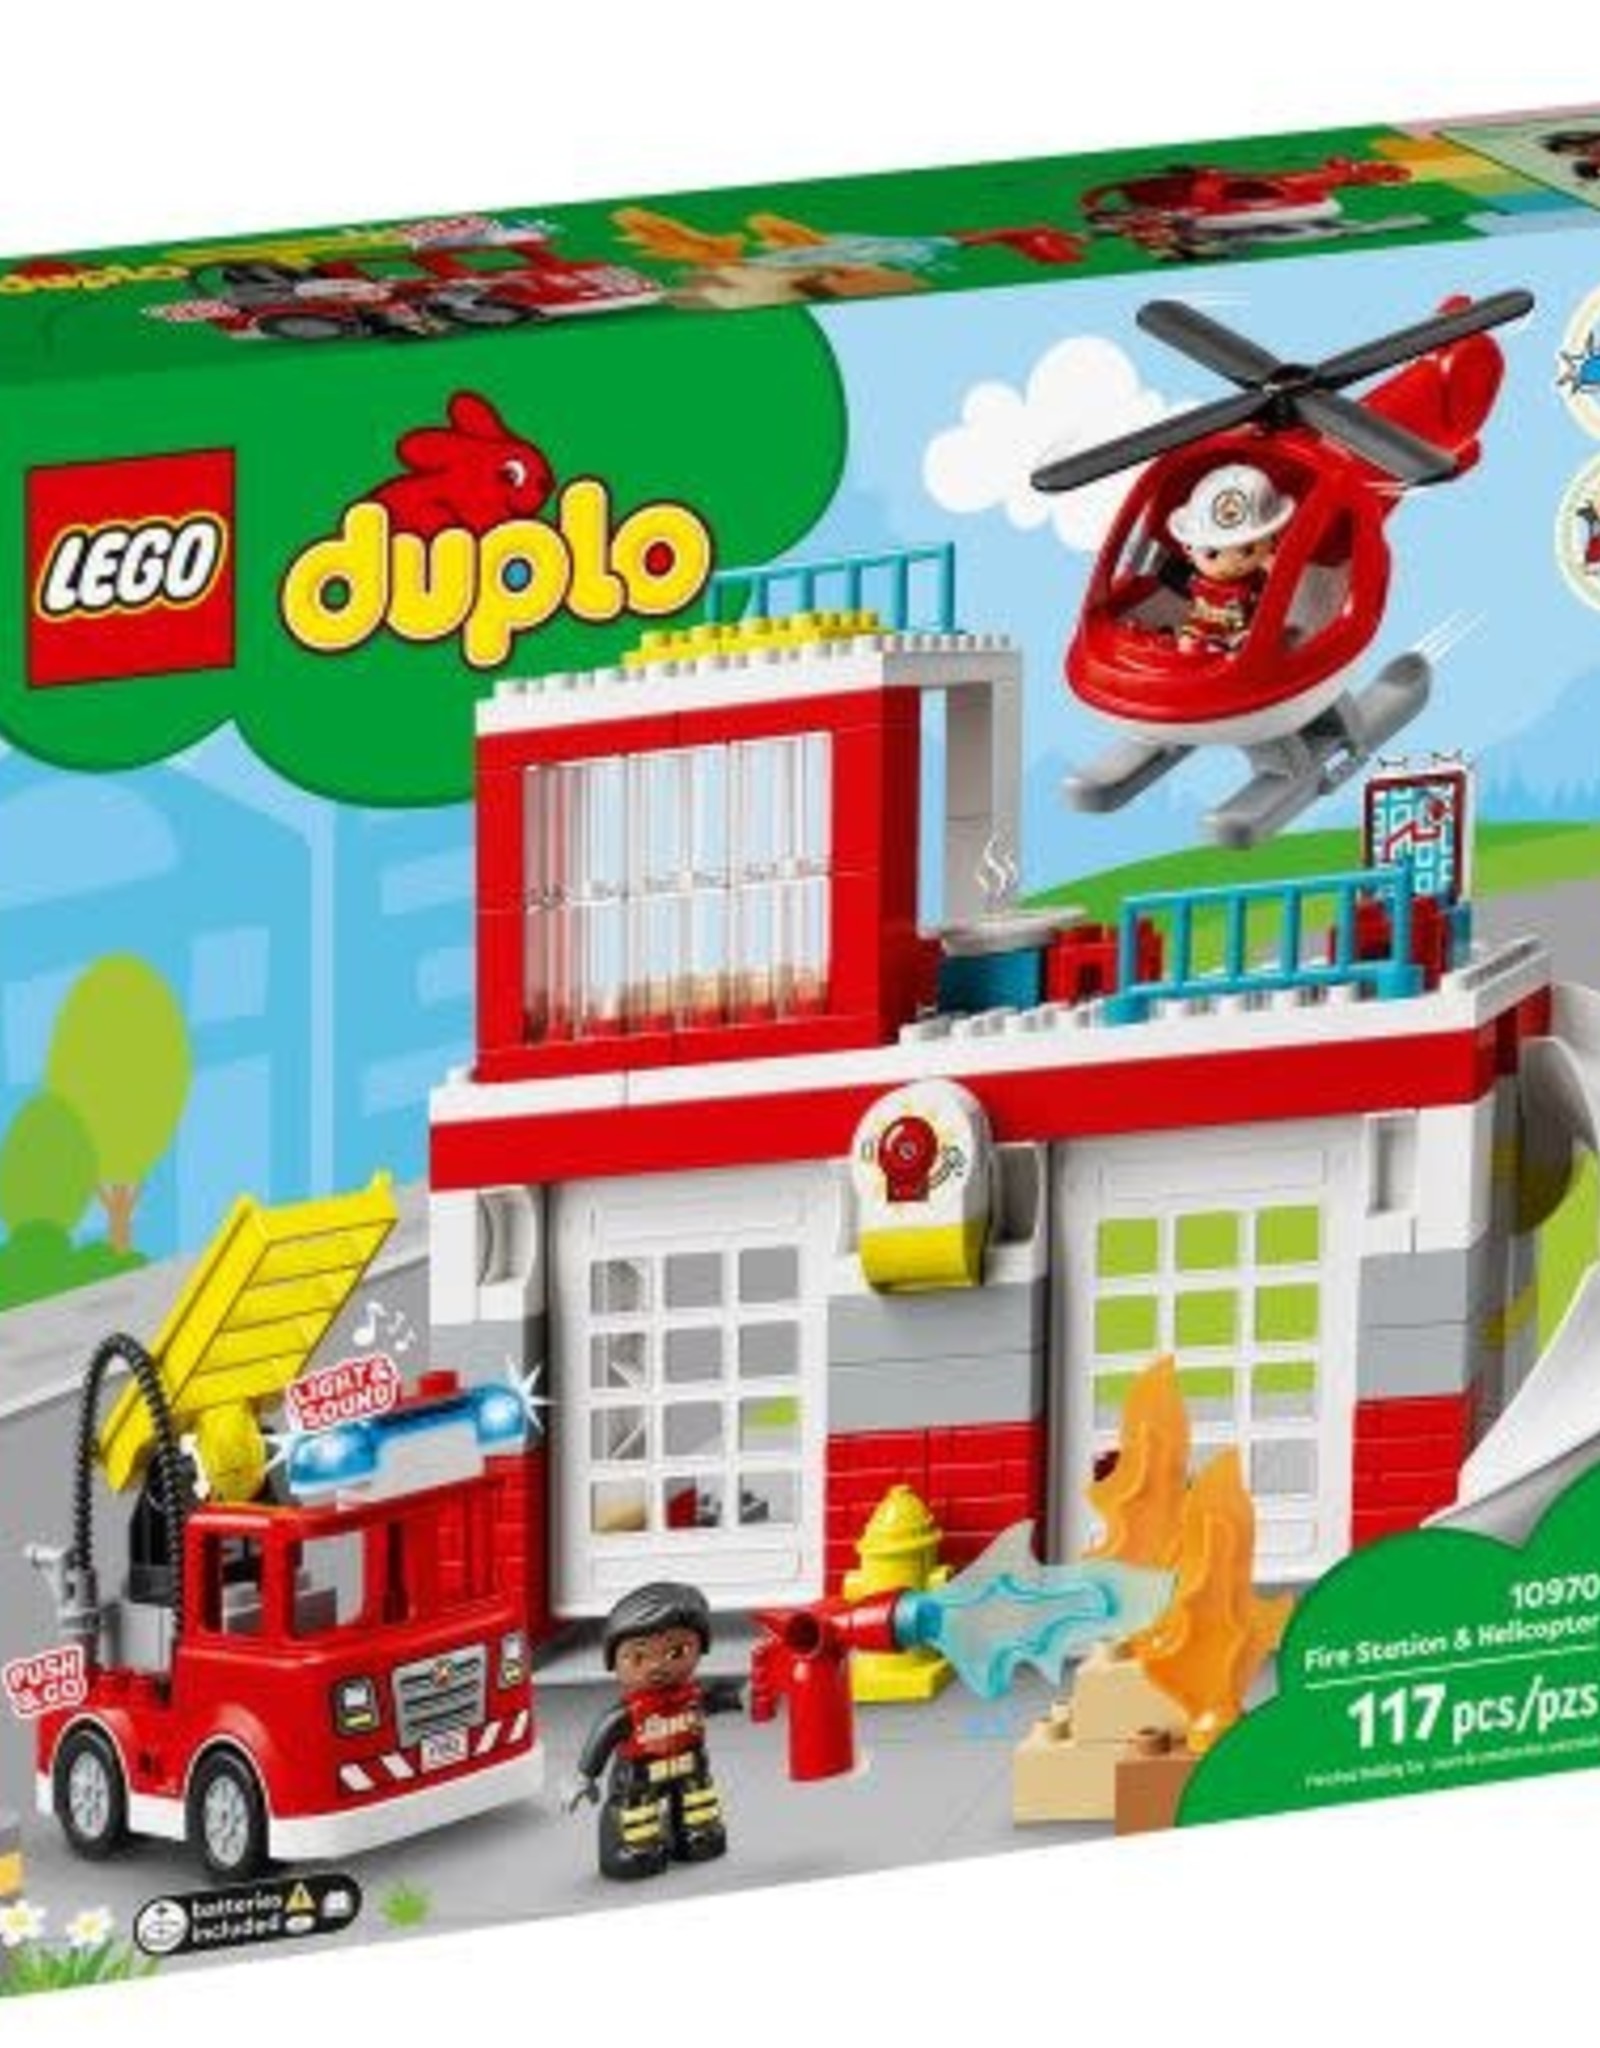 LEGO 10970 Fire Station & Helicopter